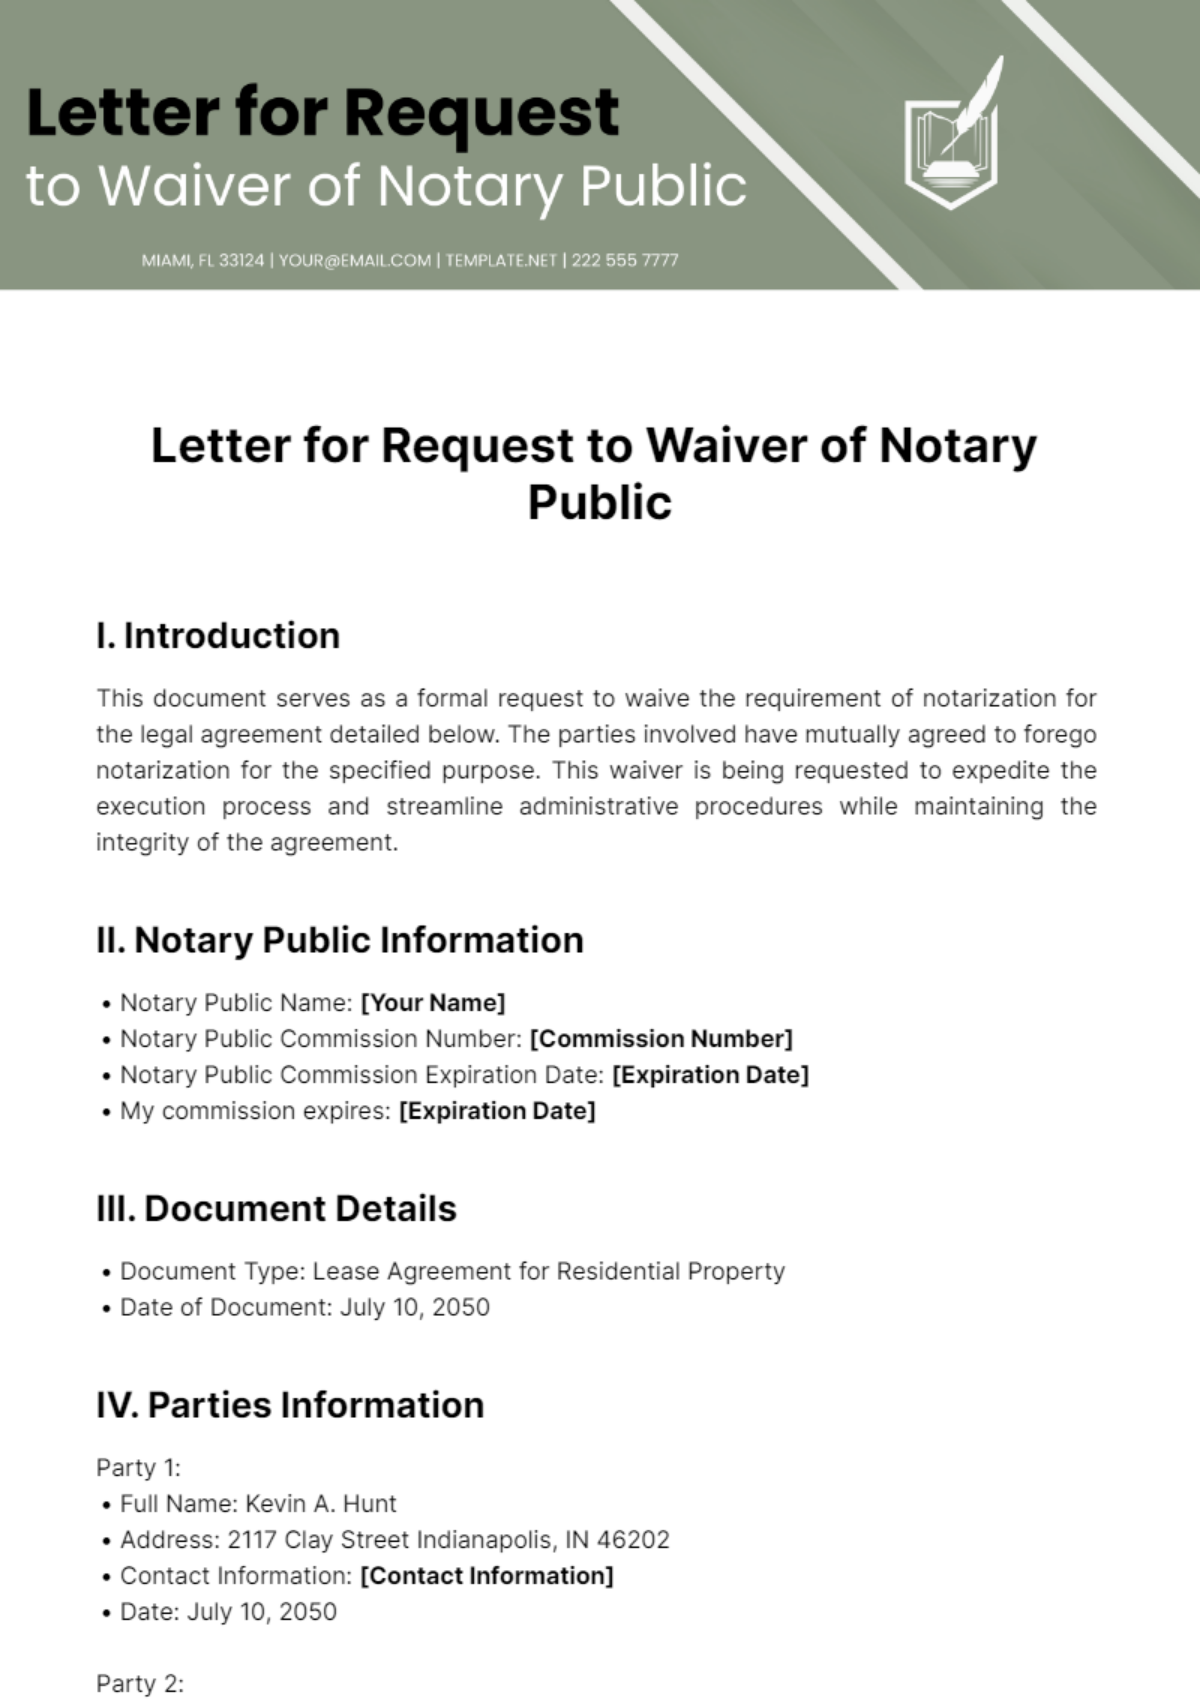 Letter for Request to Waiver of Notary Public Template